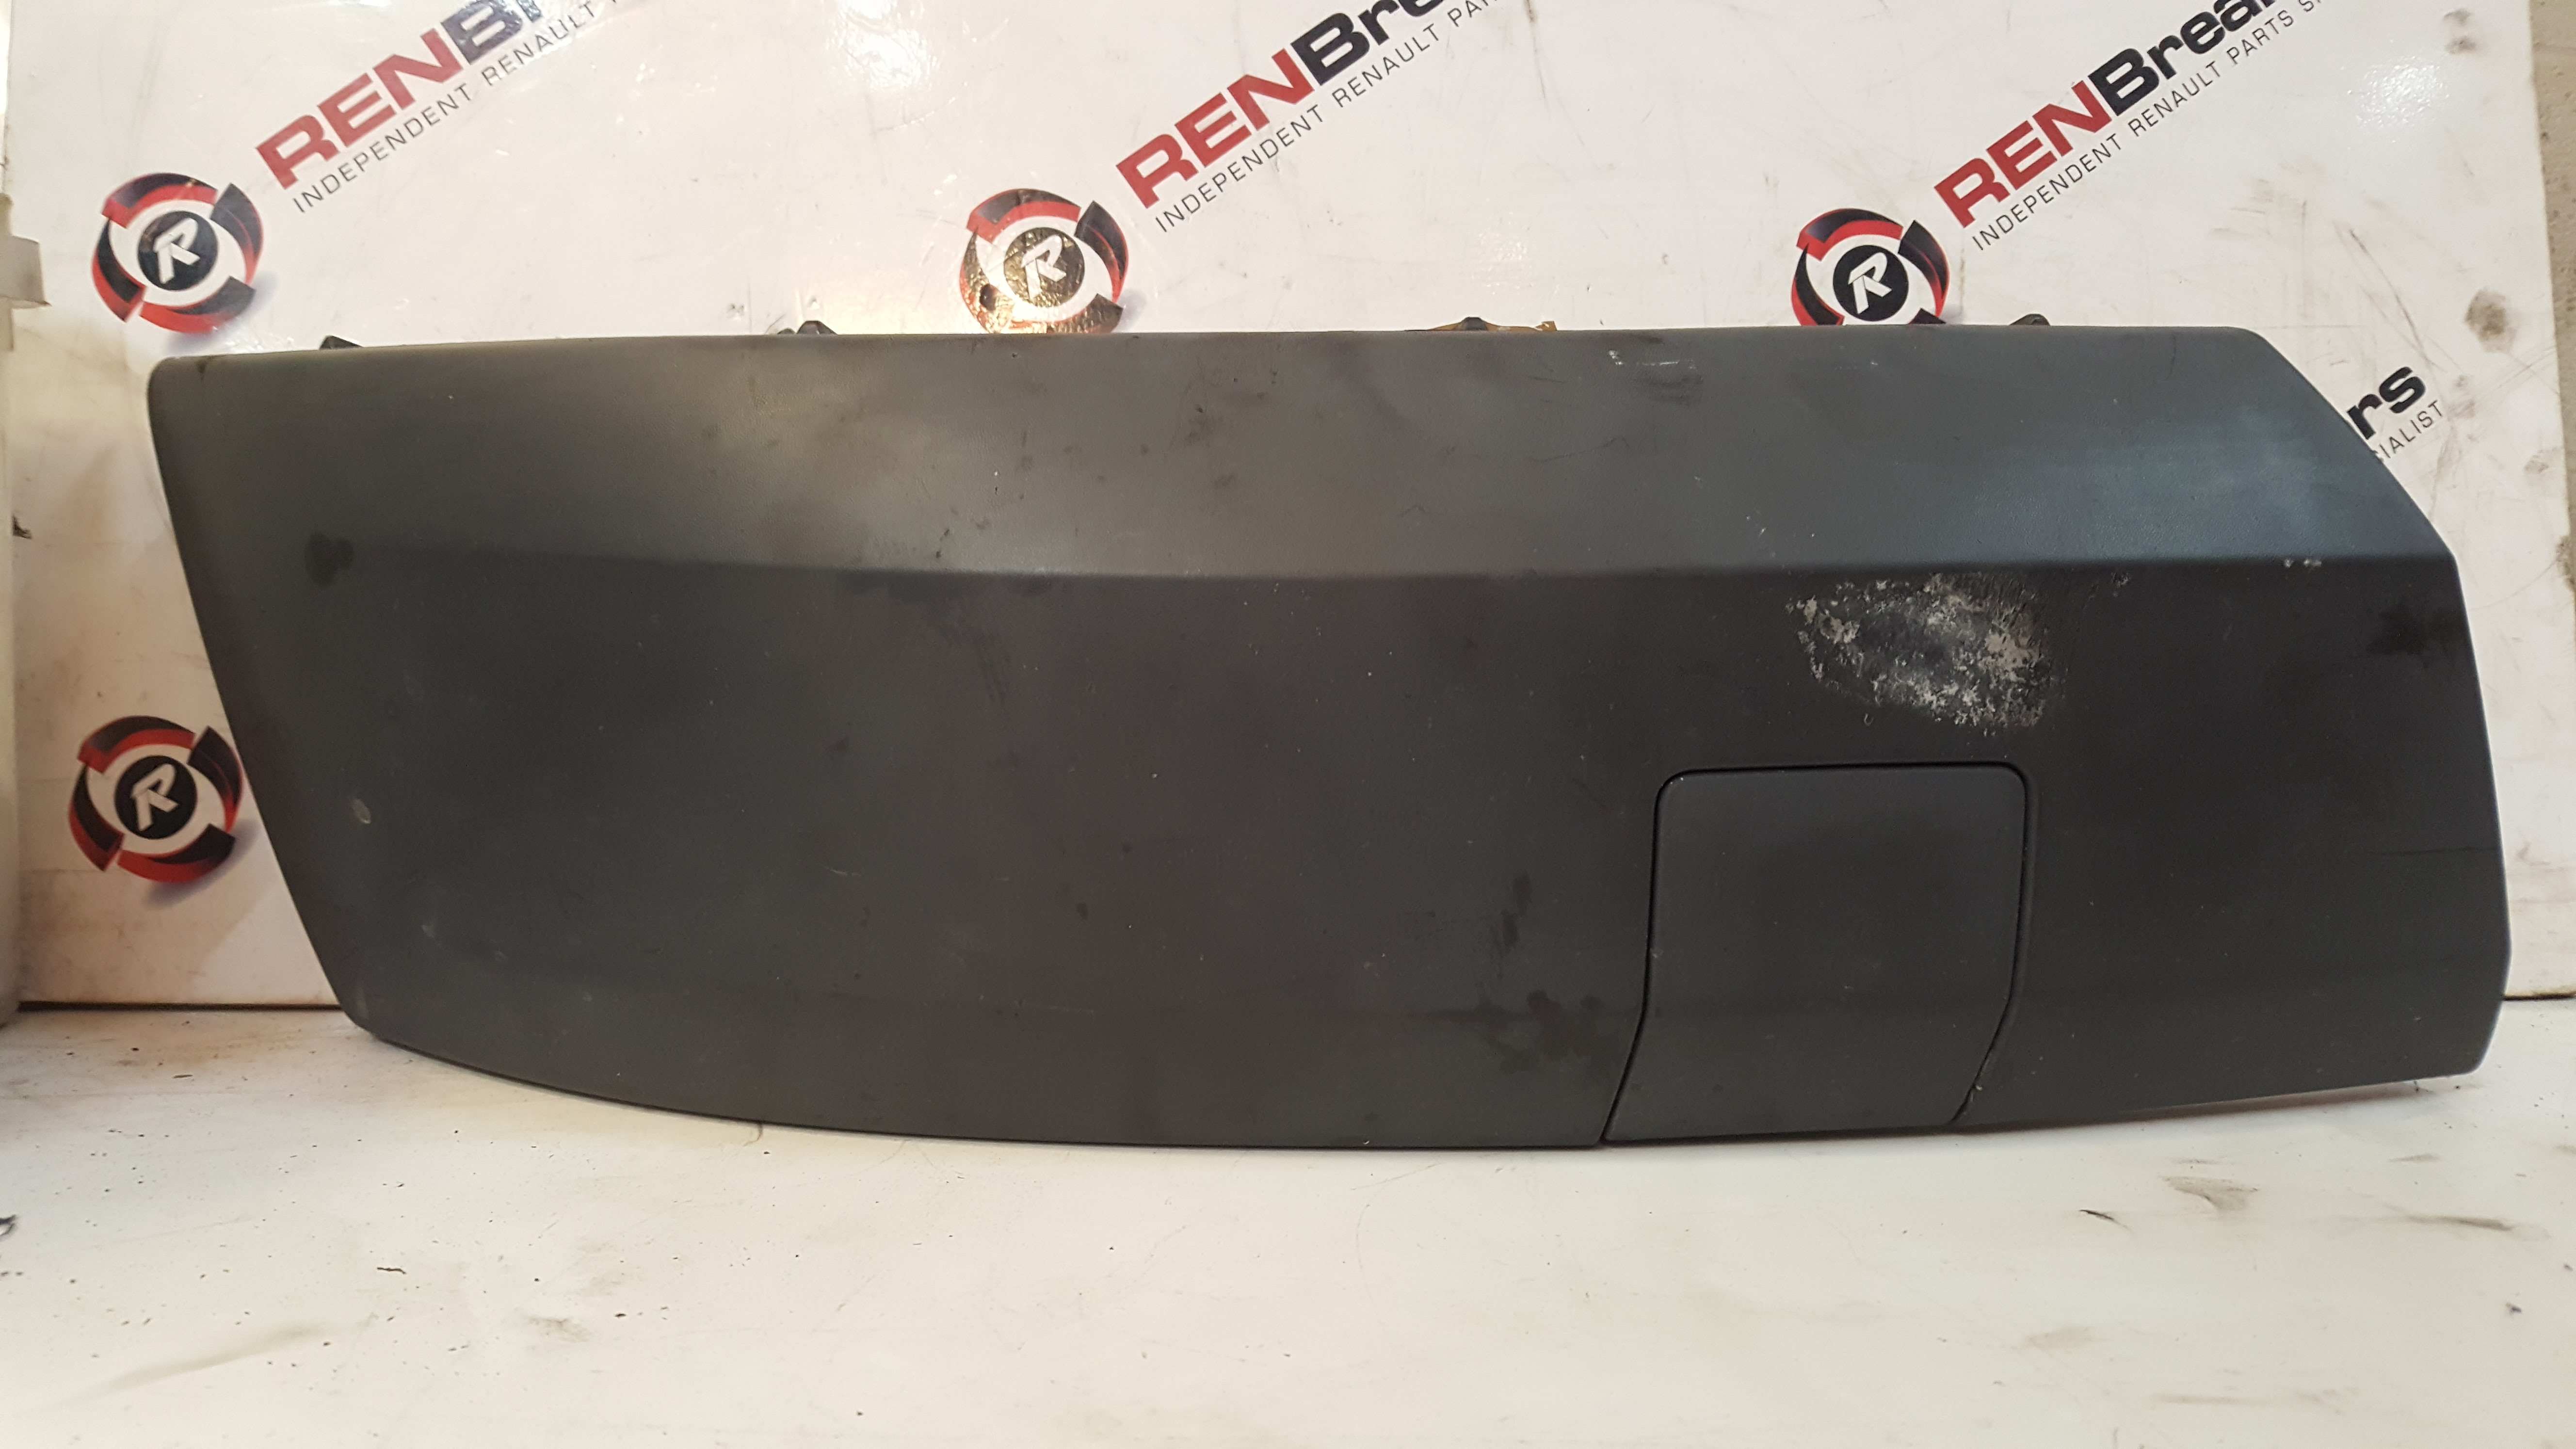 Renault Modus 2004-2008 Drivers OSF Os Front Bumper Moulding Trim  8200665837